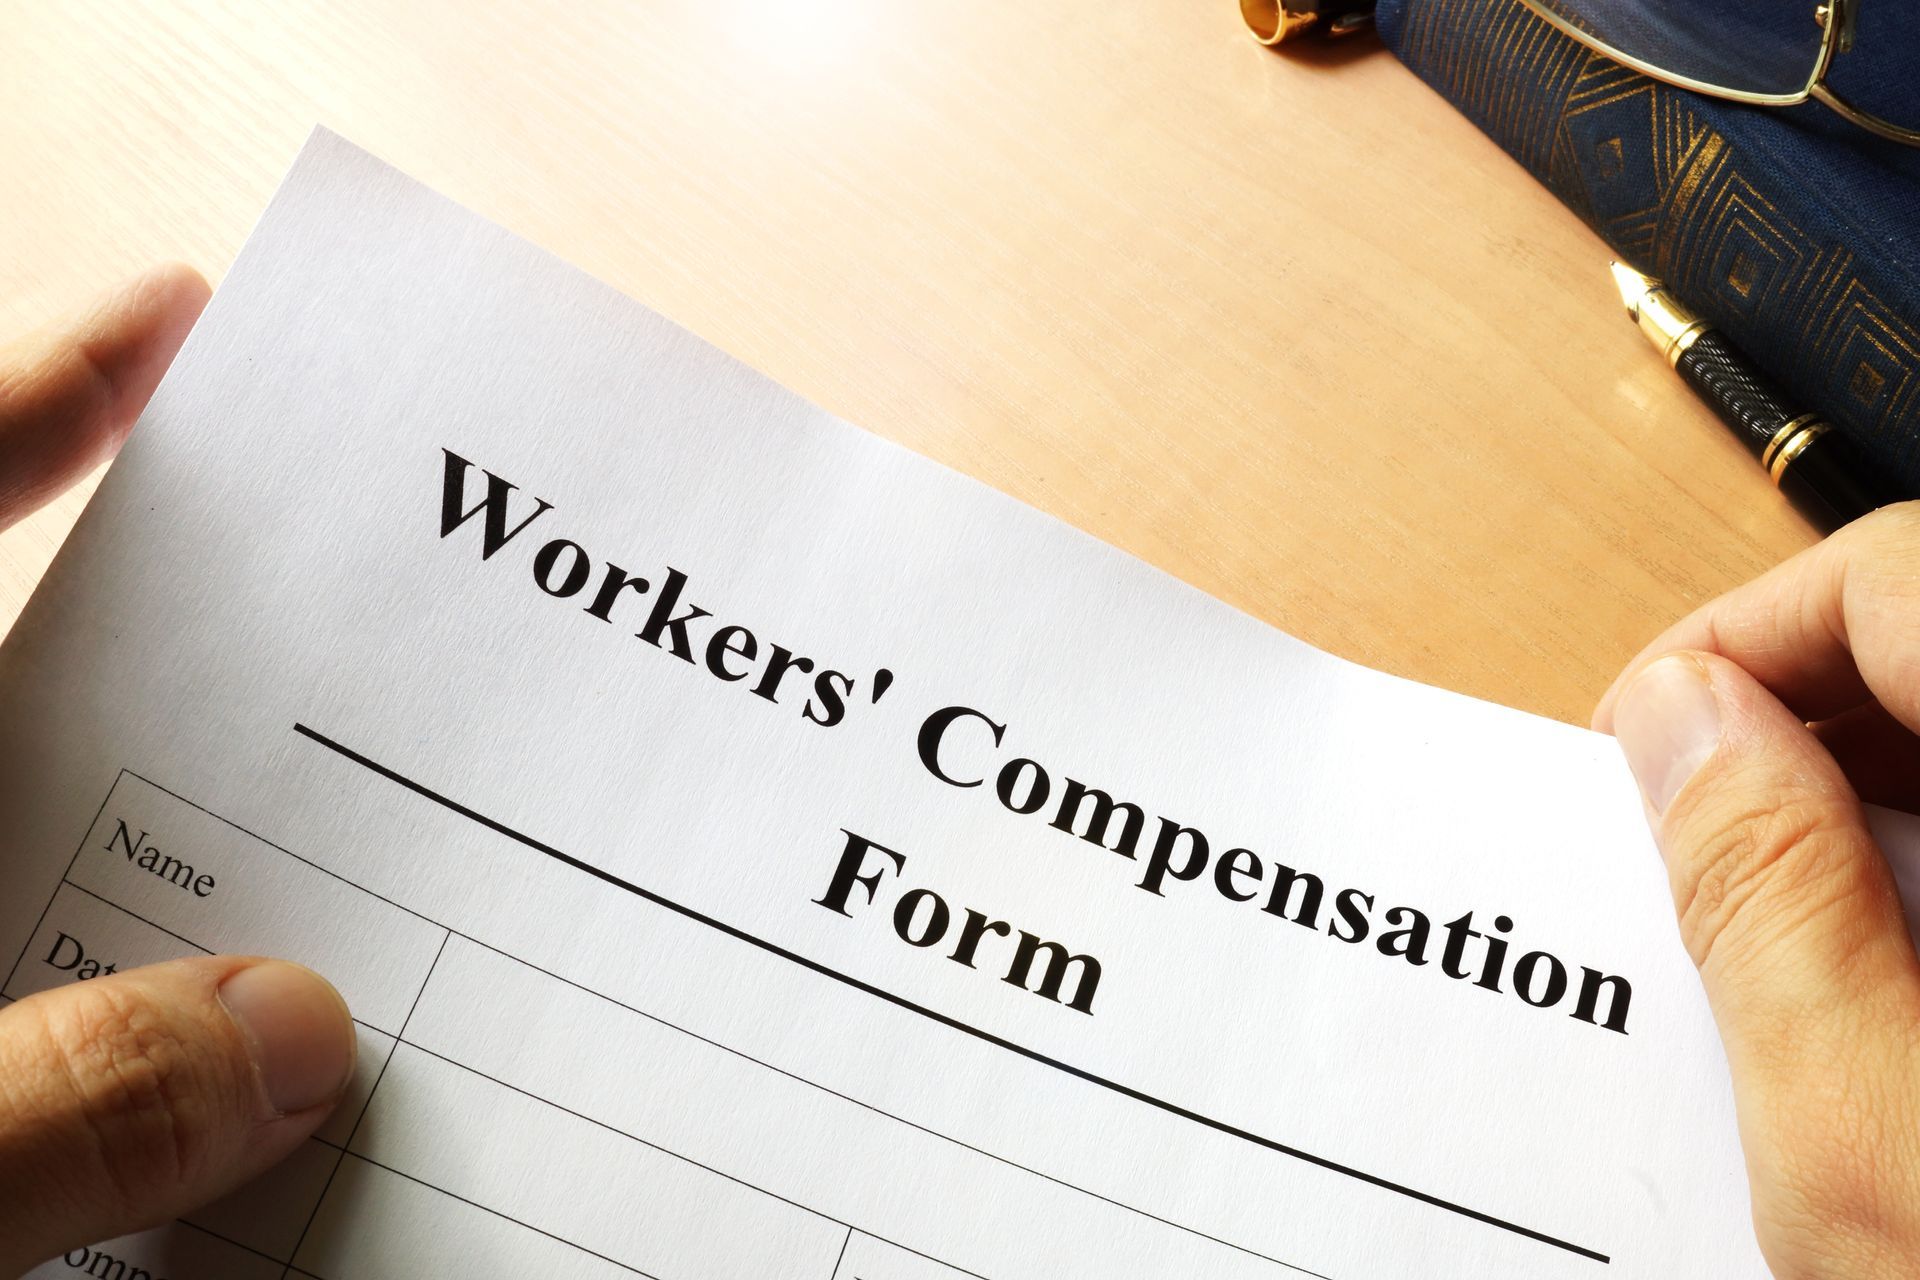 Workers Comp report with hands filling out the form